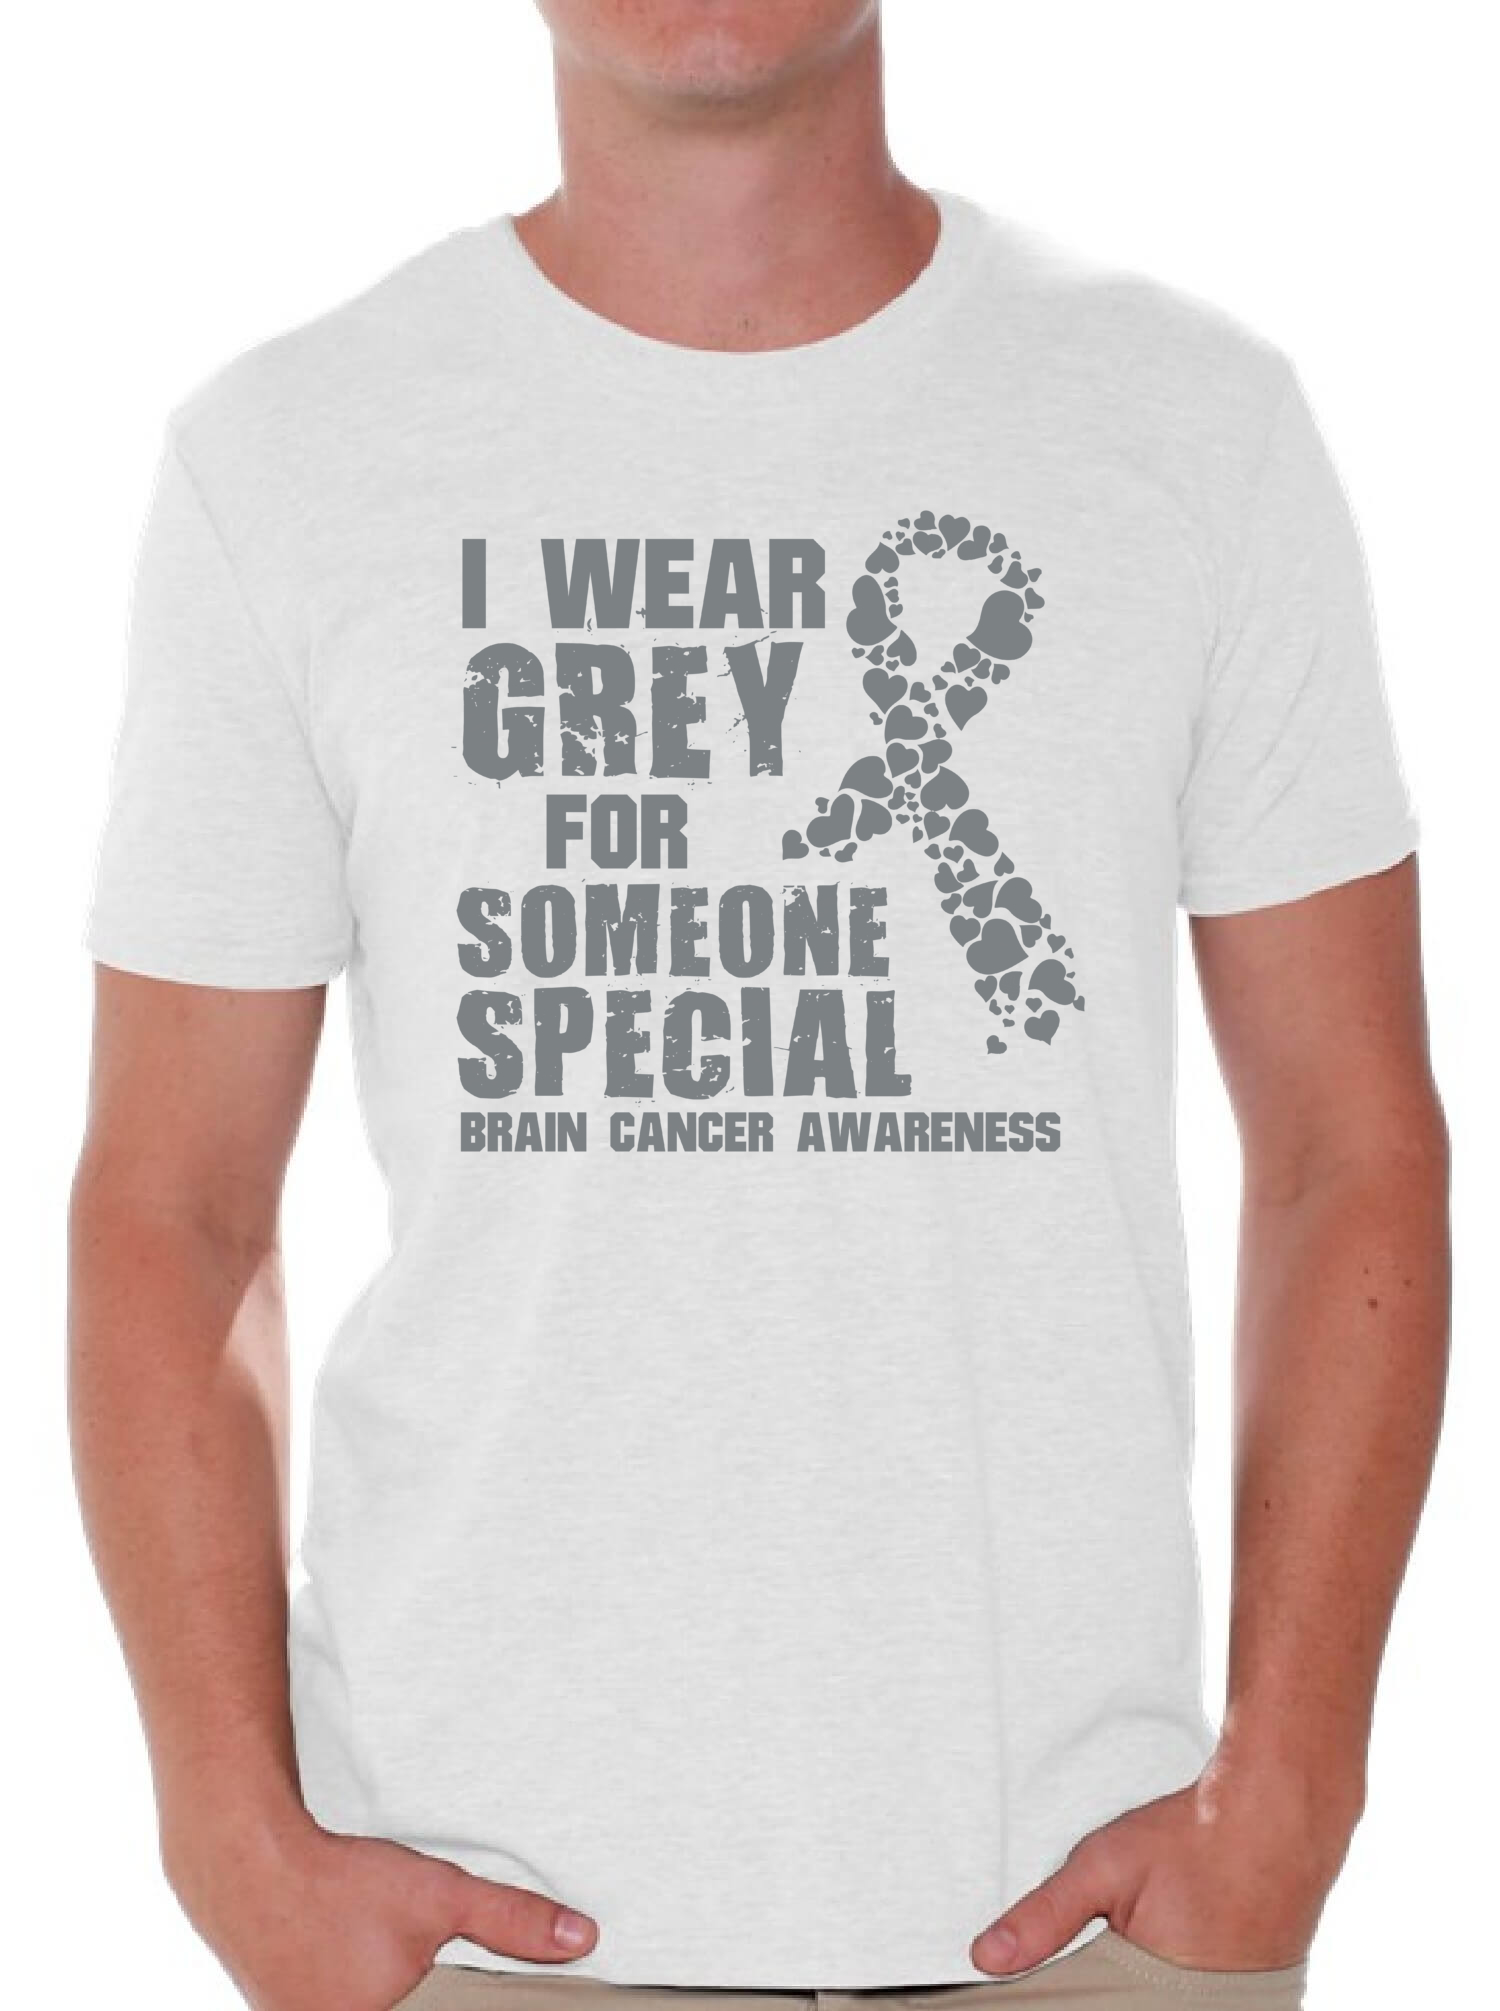 Awkward Styles Men's I Wear Grey for Someone Special Graphic T-shirt Tops Brain Cancer Awareness - image 1 of 4